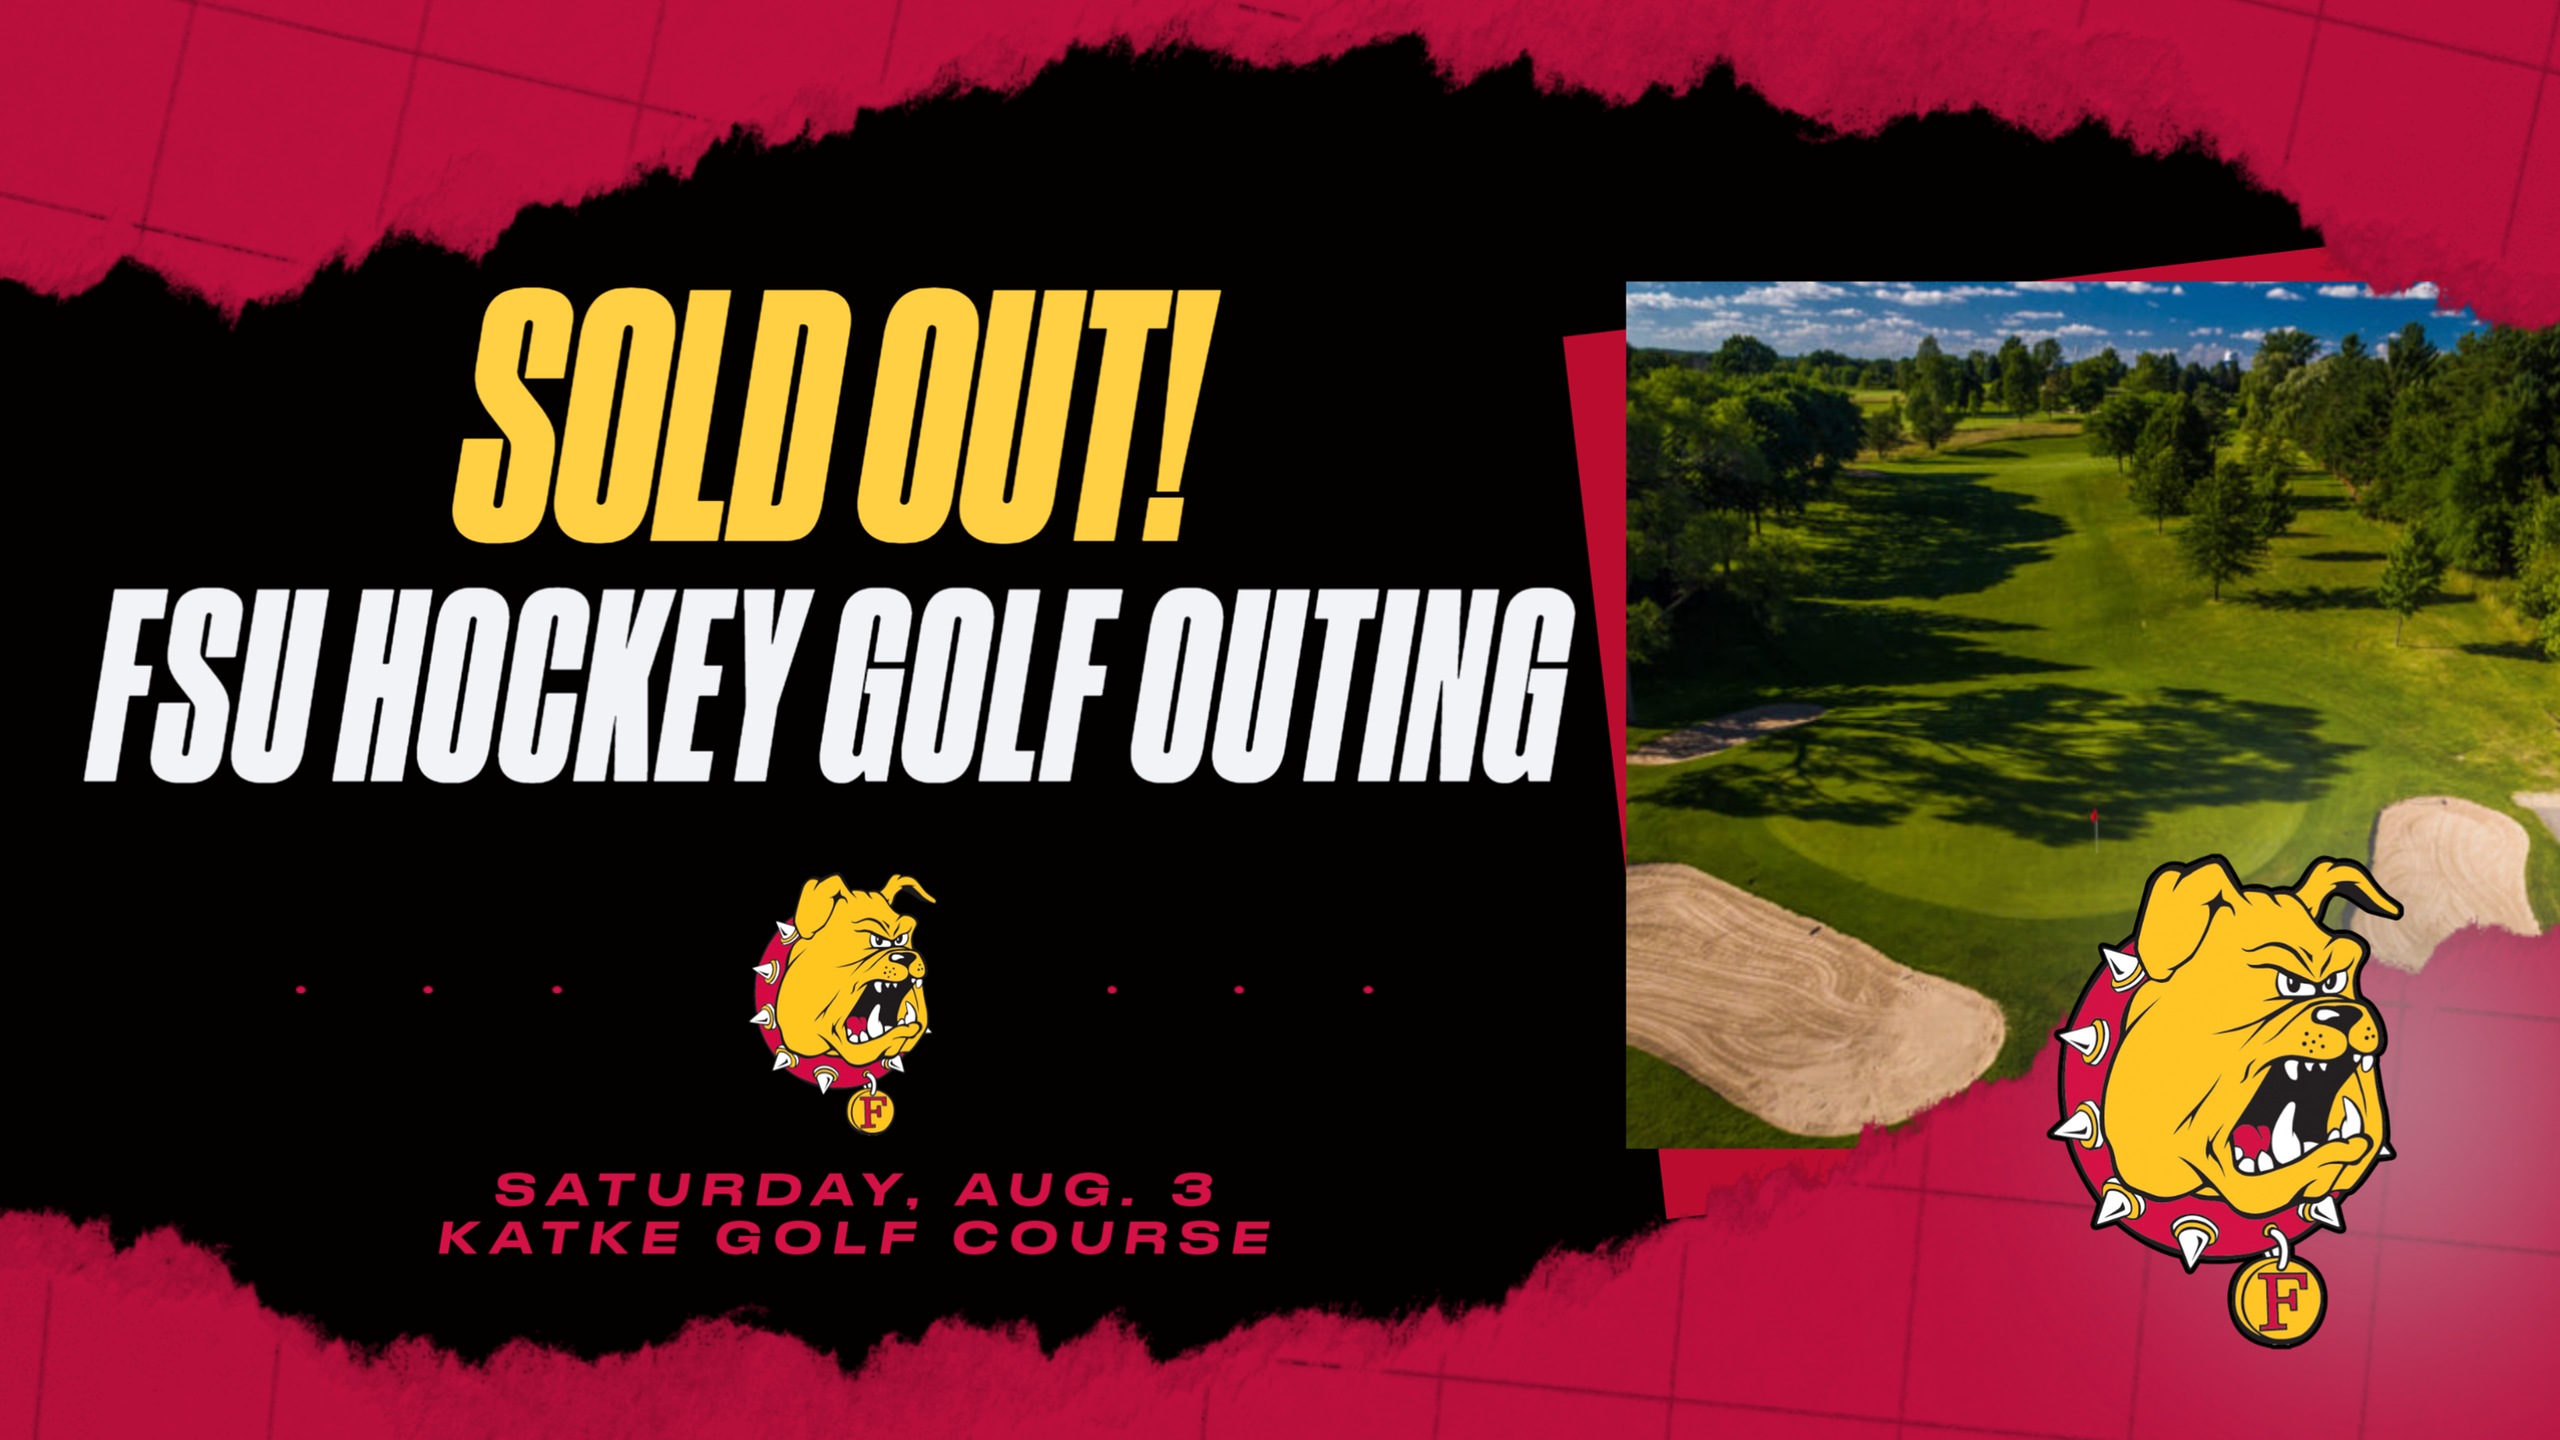 SOLD OUT! Ferris State Hockey Golf Outing Sold Out For 13th Consecutive Year!